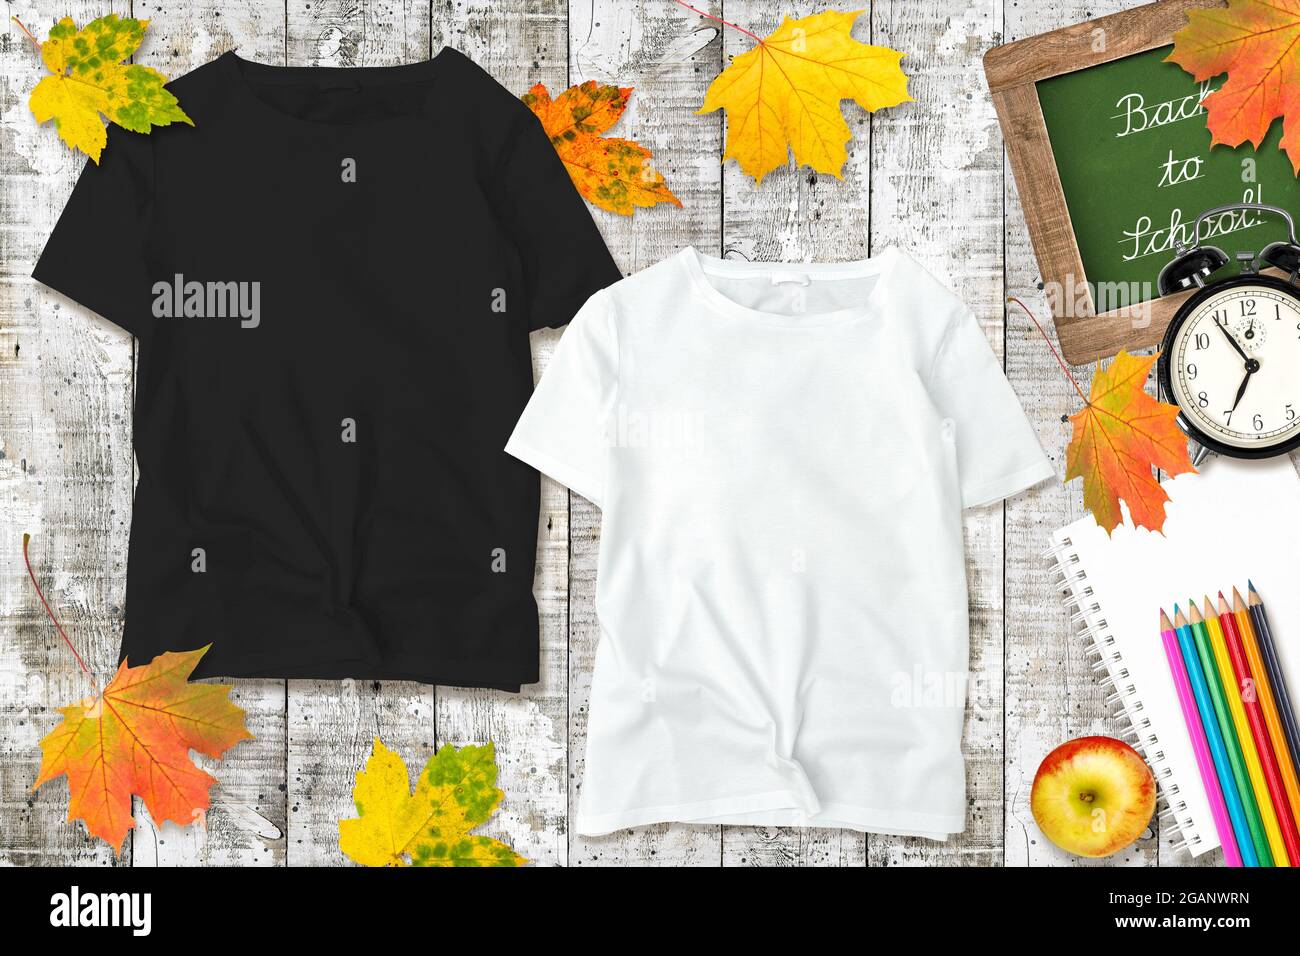 T-shirt mock up template. Back to school. Fashion flat lay for website, social media Stock Photo